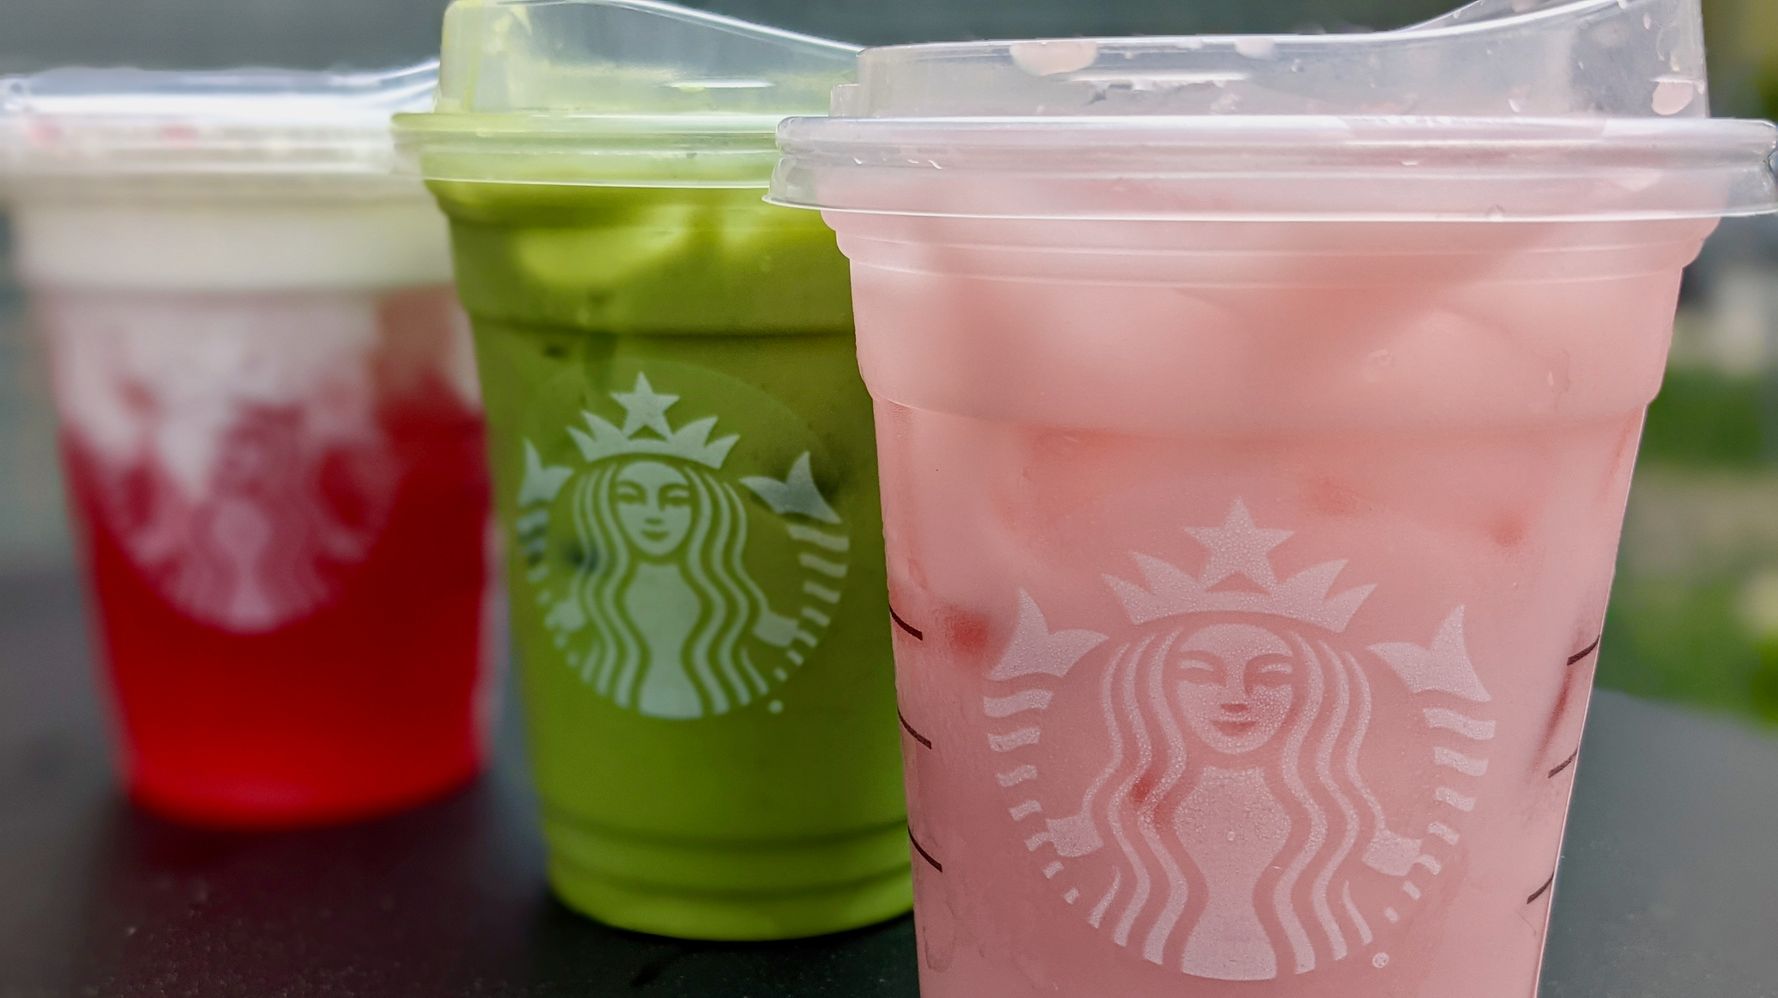 Starbucks' Pineapple Tumbler Will Send You on an Instant Vacation